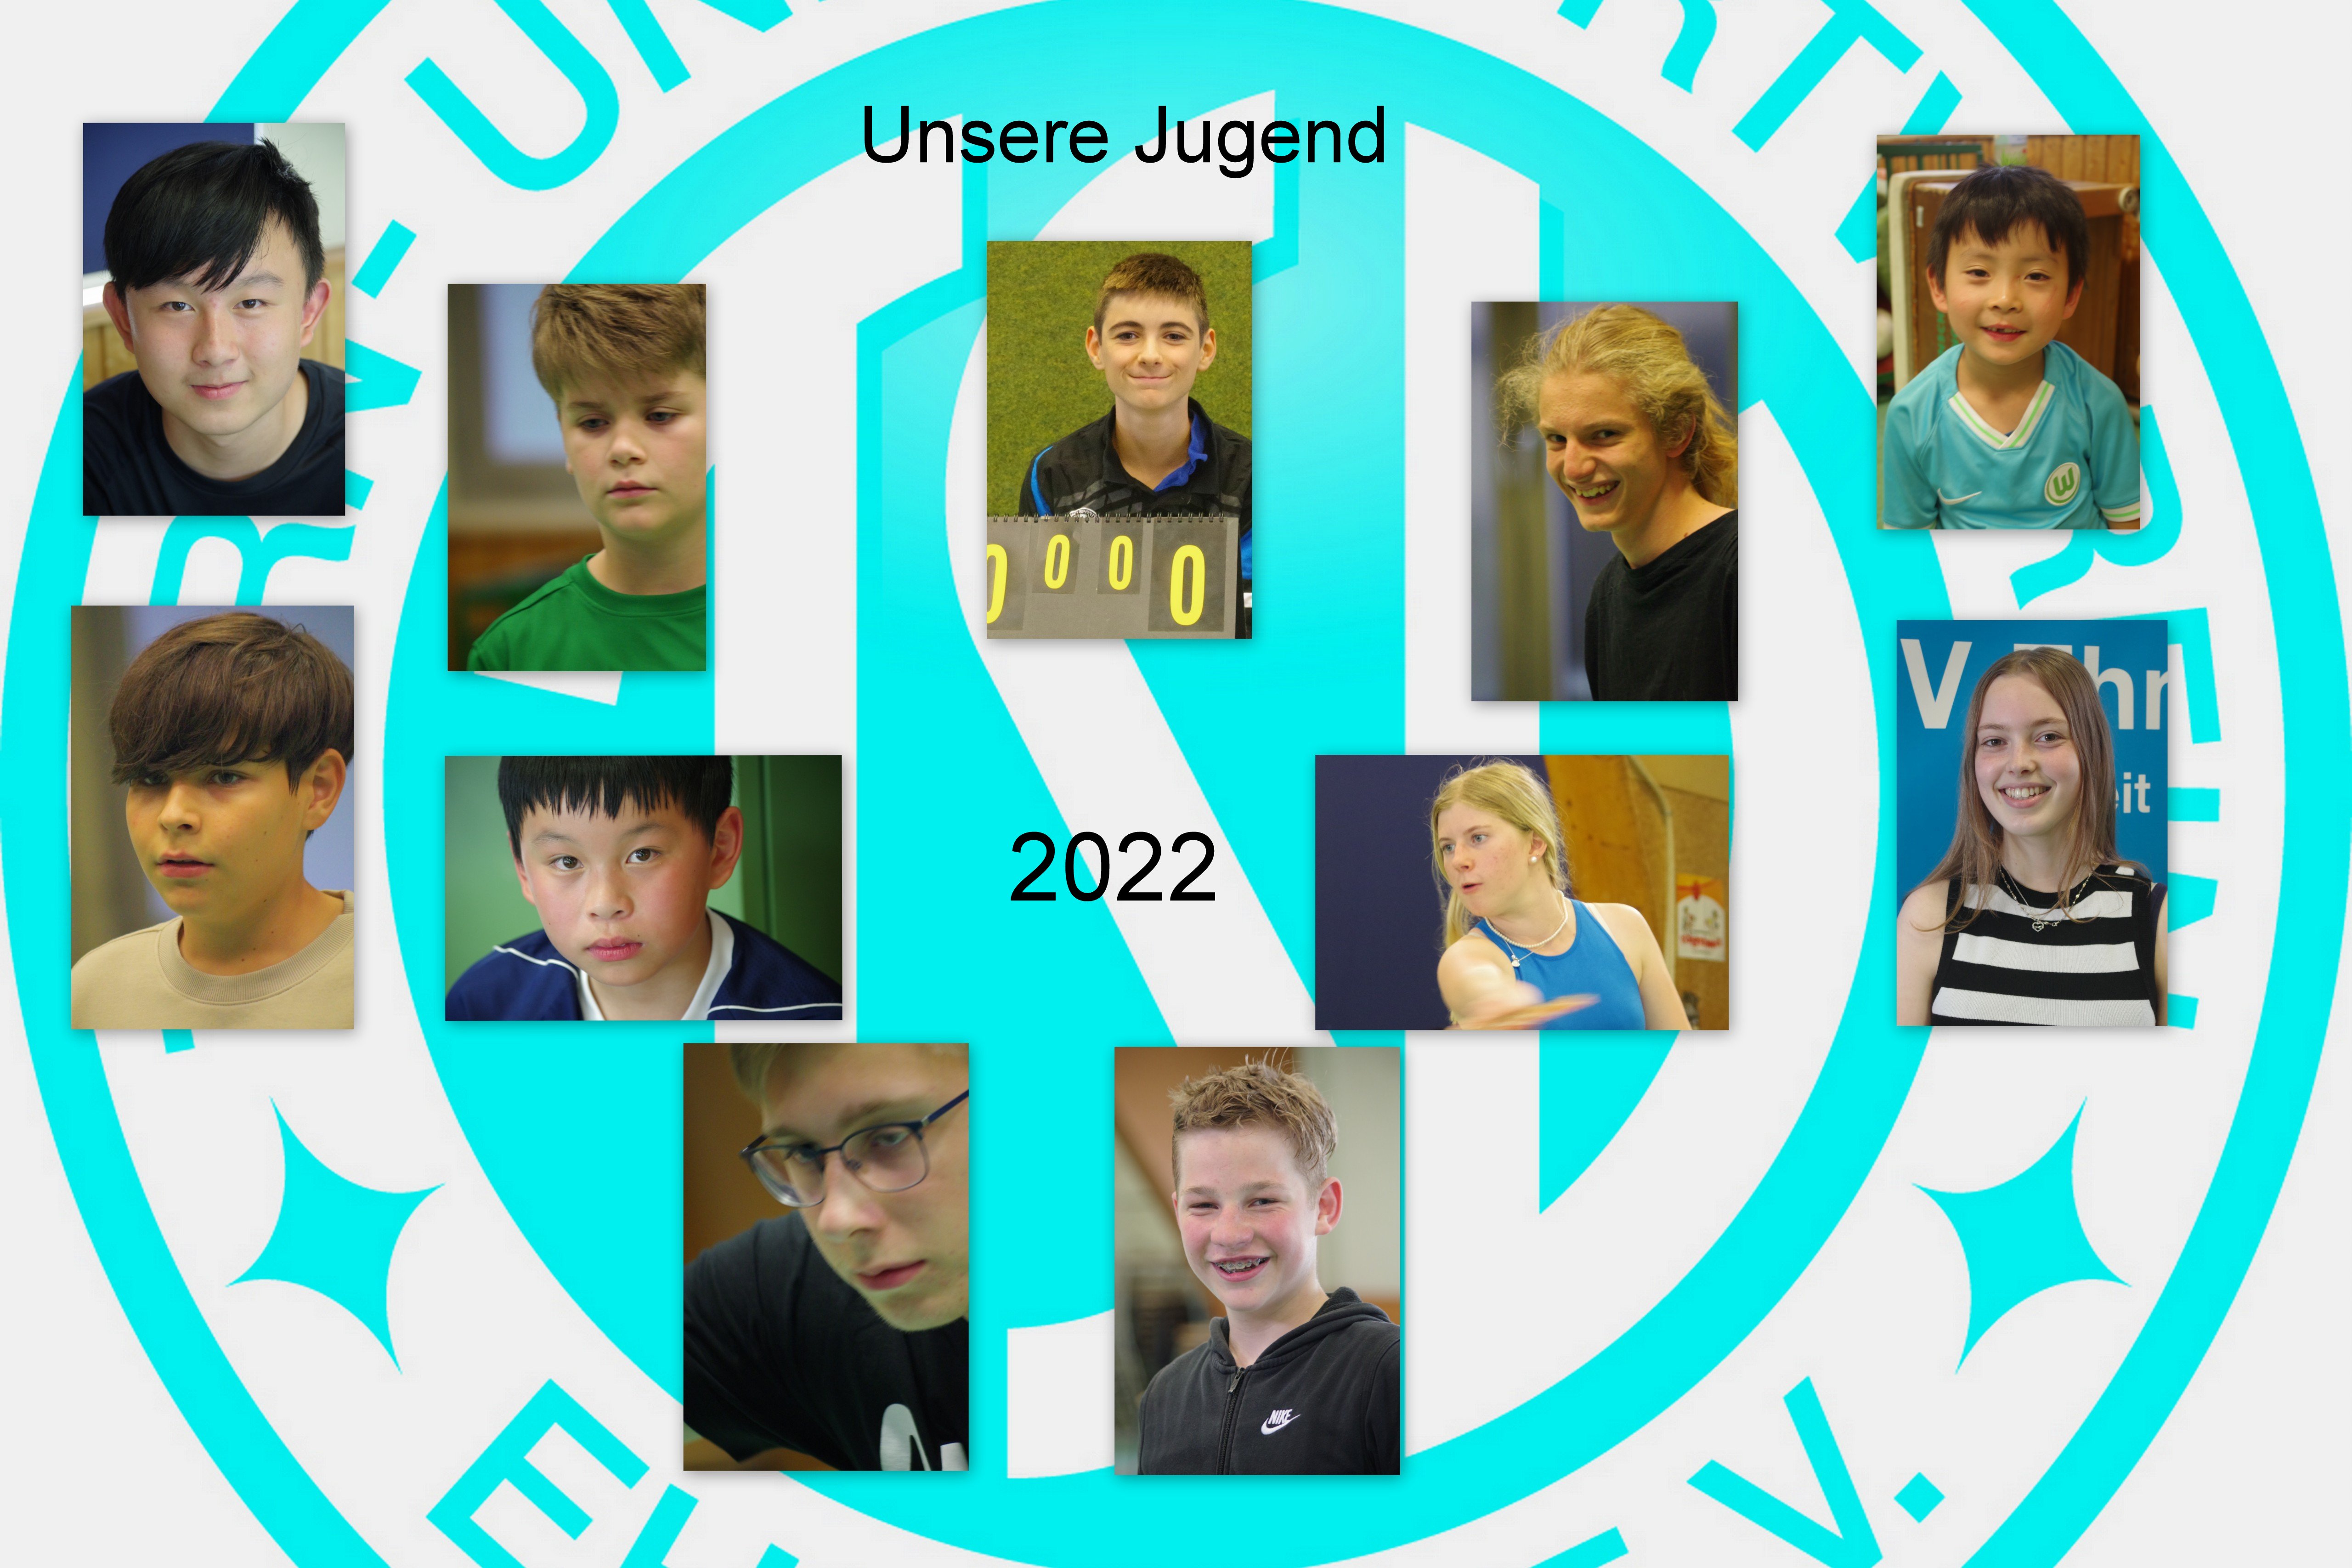 Unsere Jugend 2022